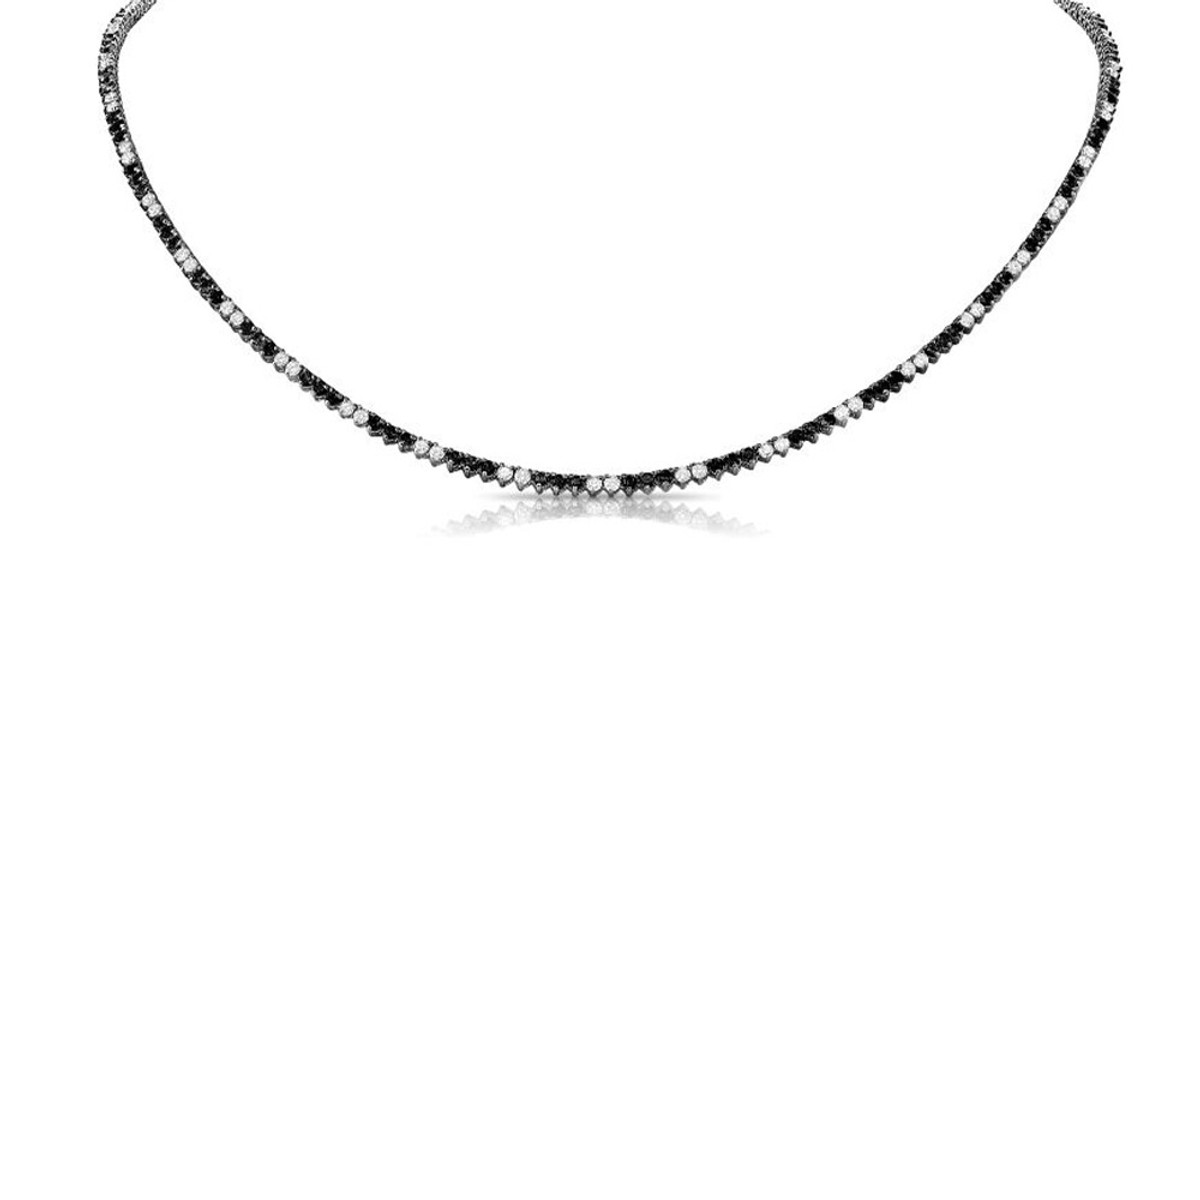 Hyde Park Collection 14K White Gold Black and White Diamond Necklace-38424